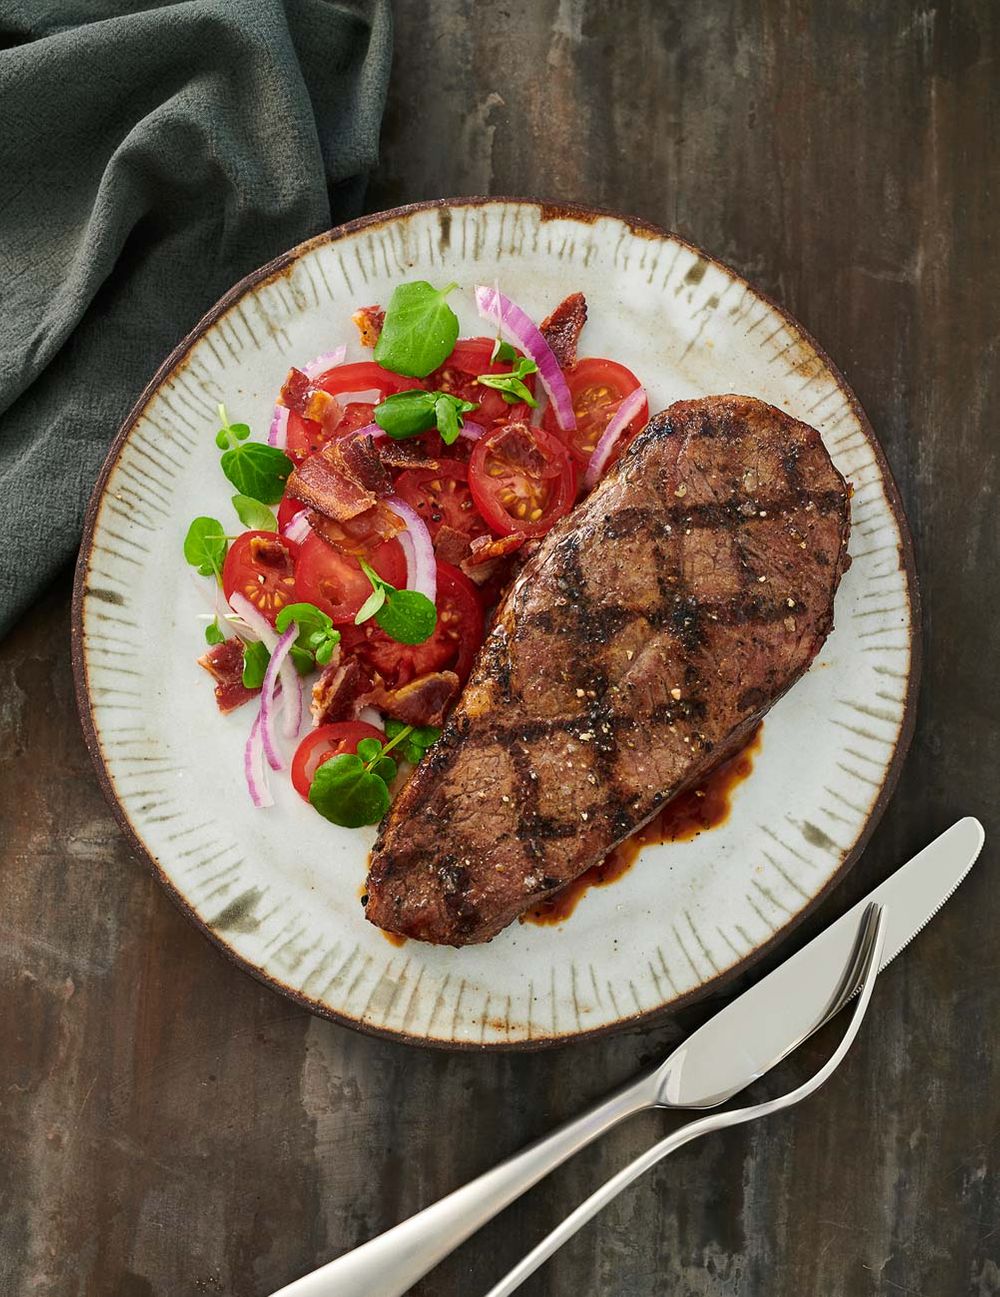 Cinnamon spiced steak with roasted tomatoes